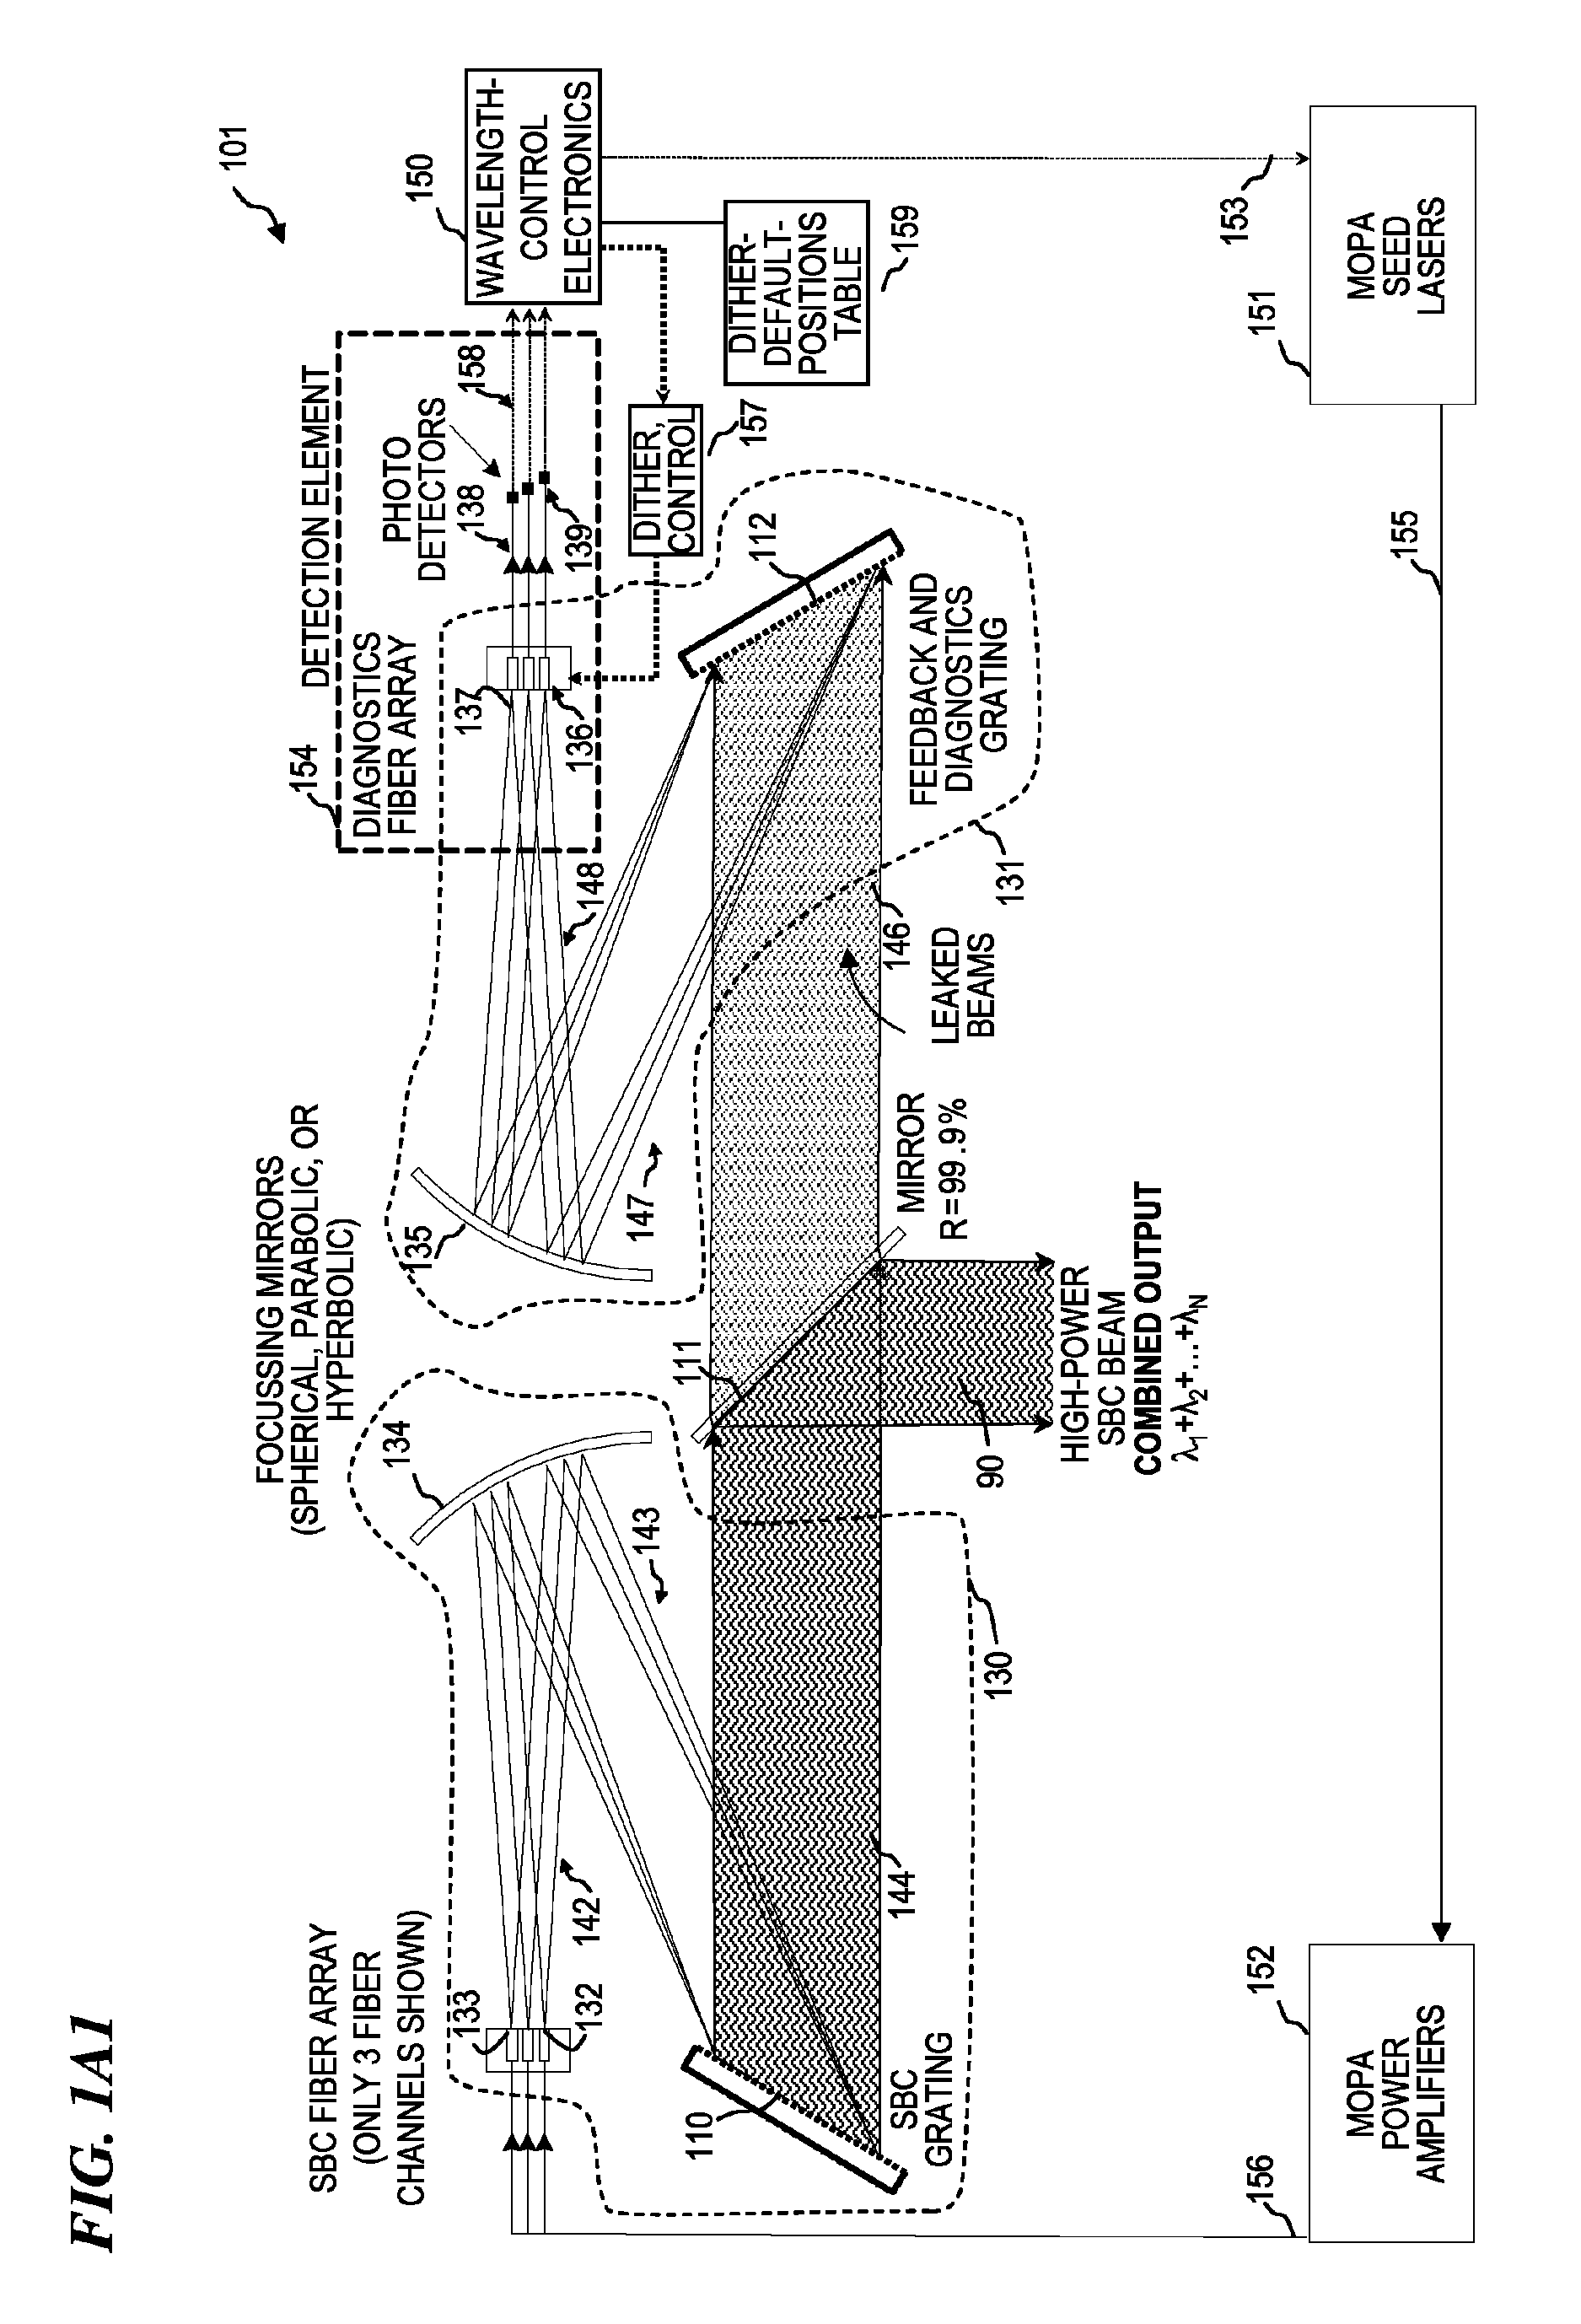 Beam diagnostics and feedback system and method for spectrally beam-combined lasers